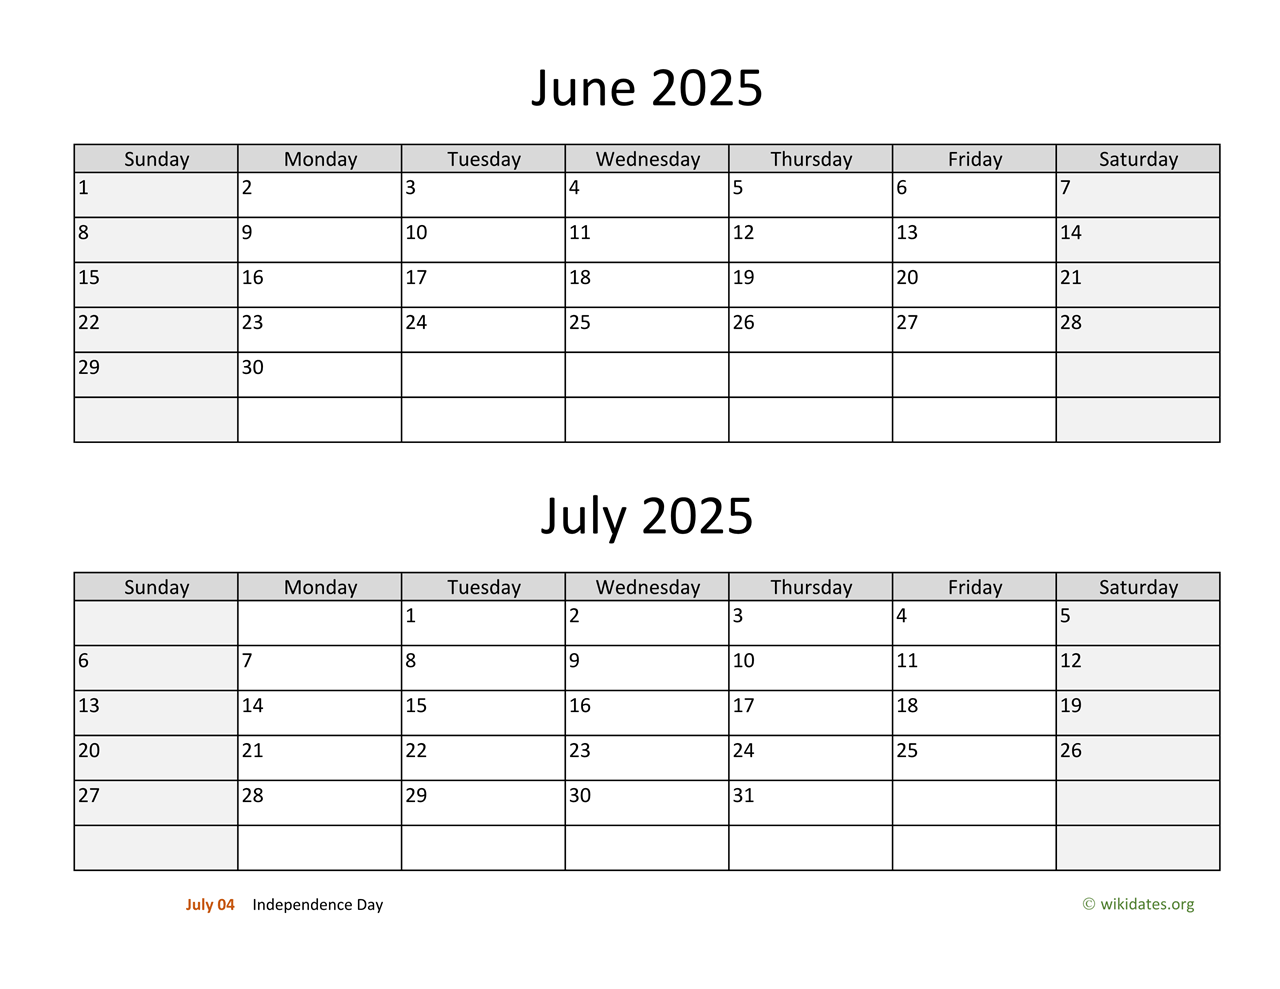 June and July 2025 Calendar  WikiDates.org